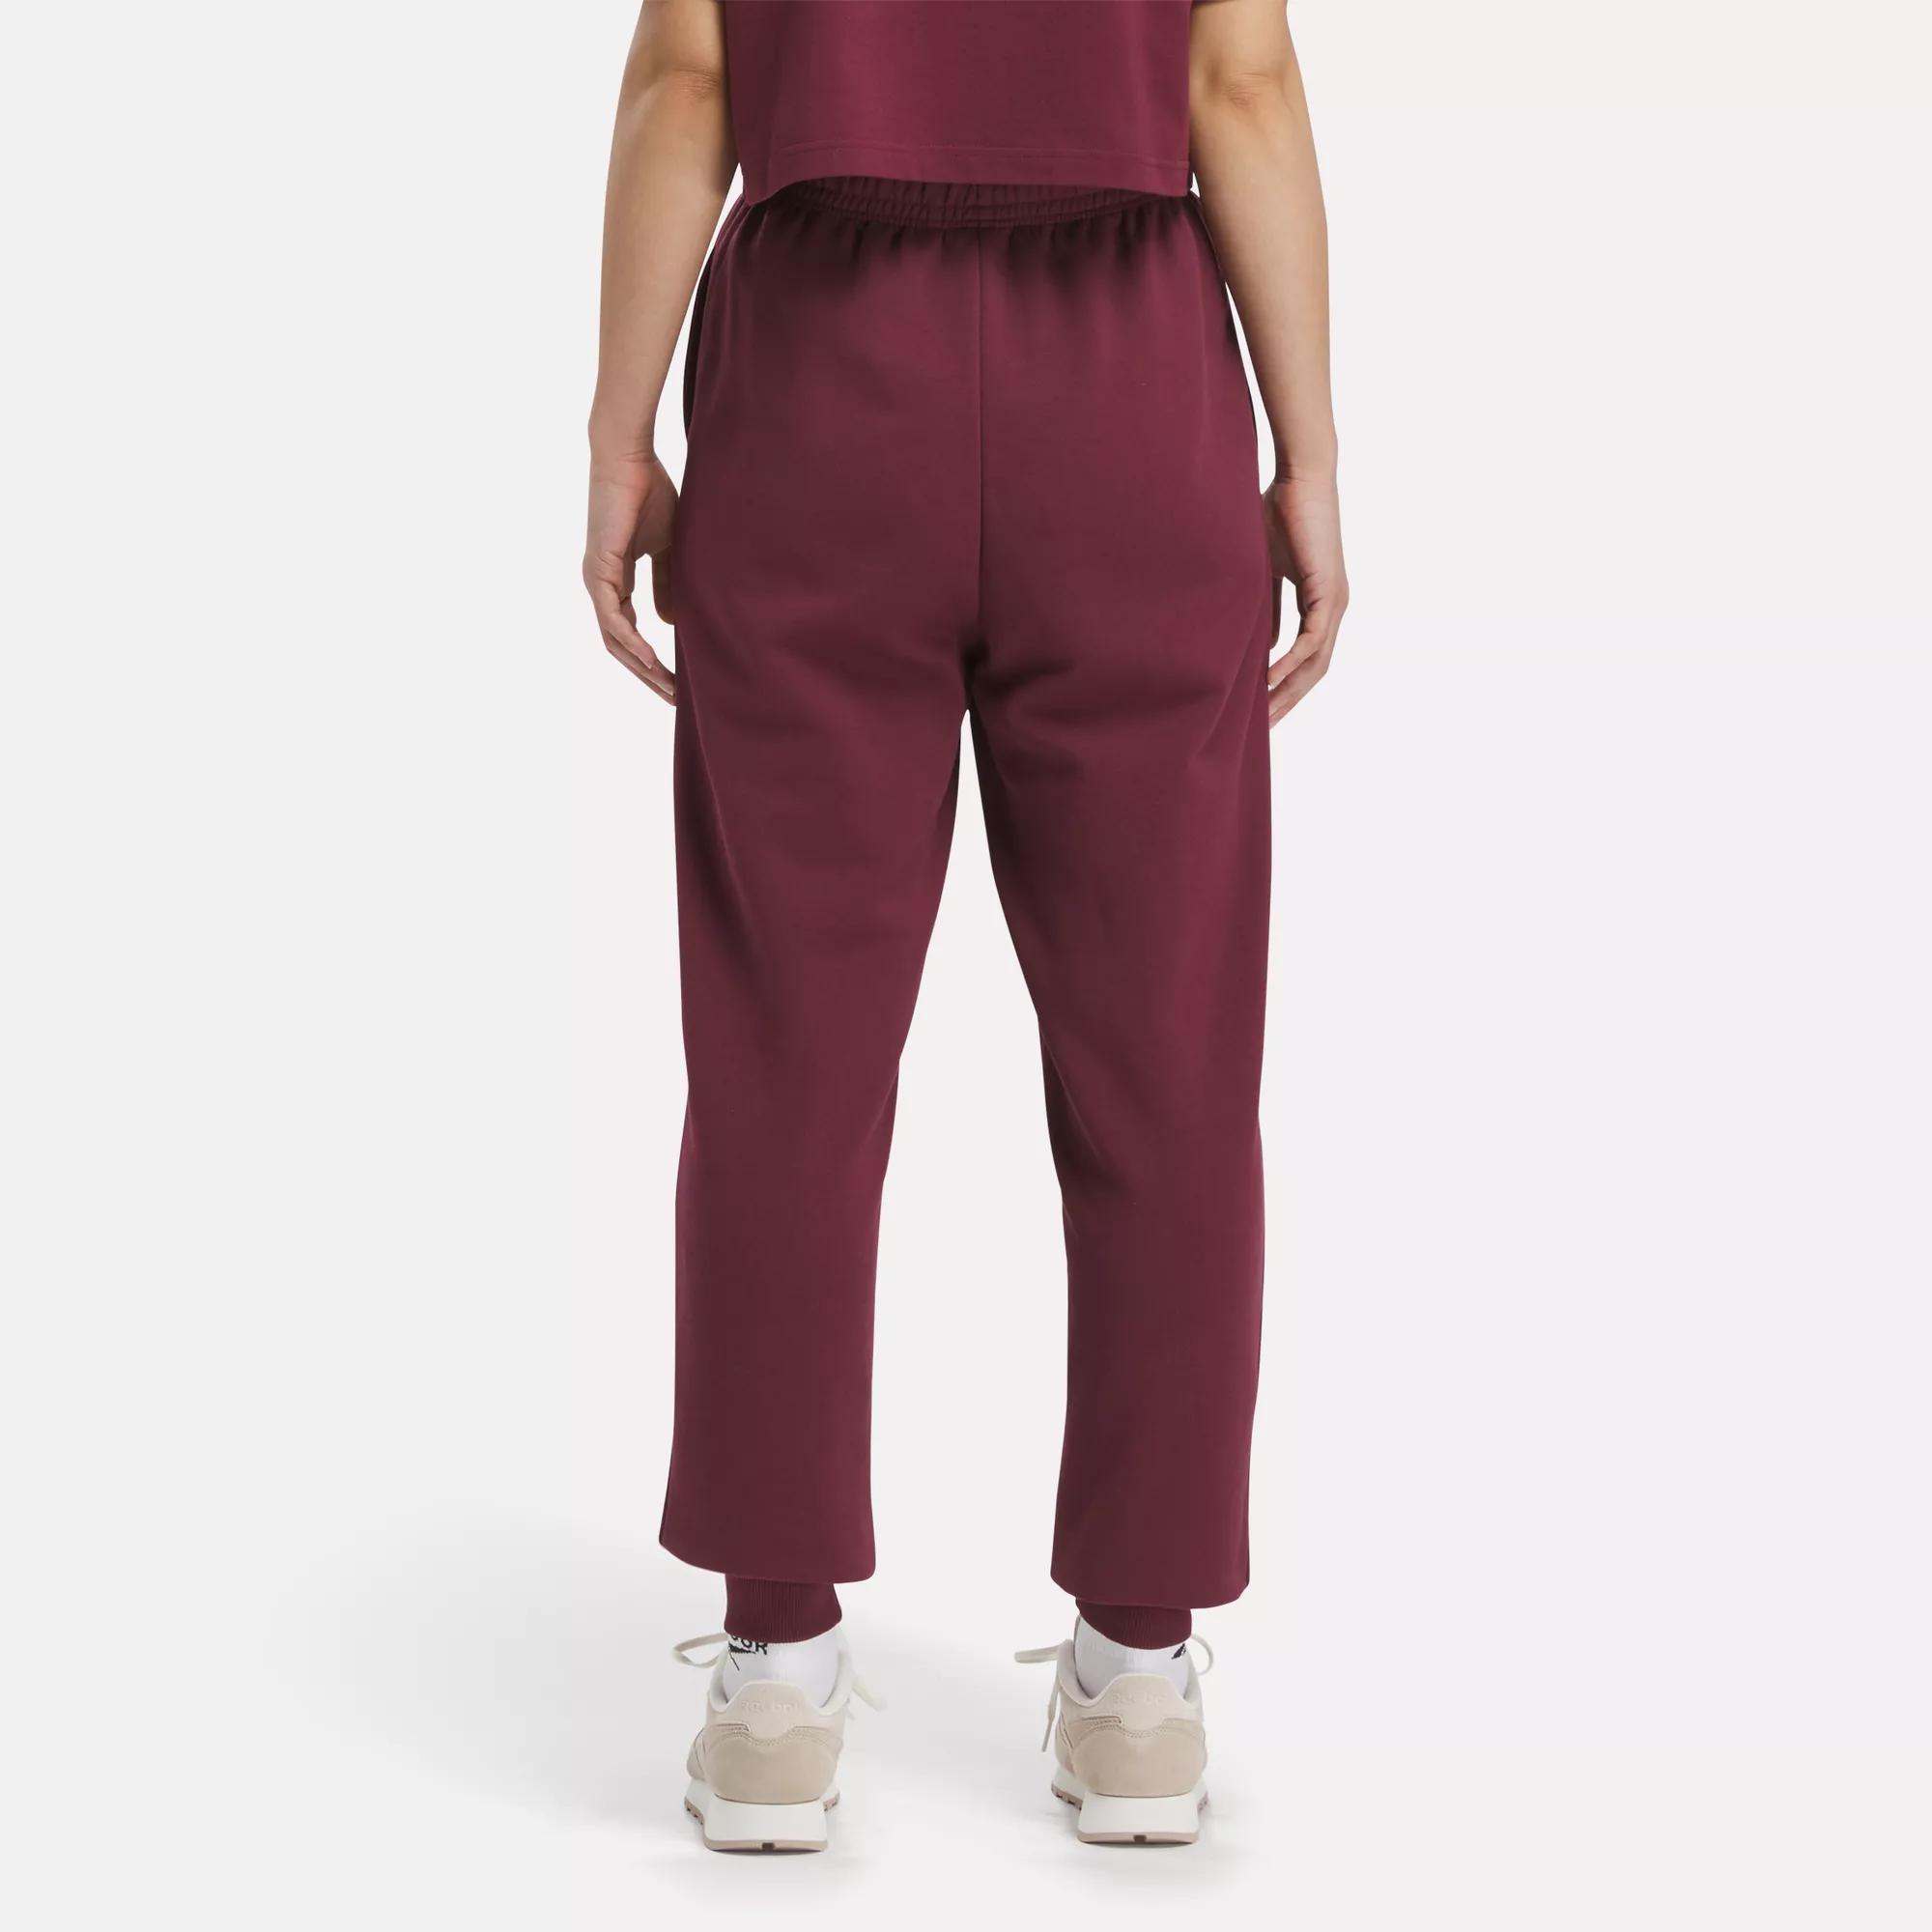  Reebok Training Essentials French Terry Cuffed Pant